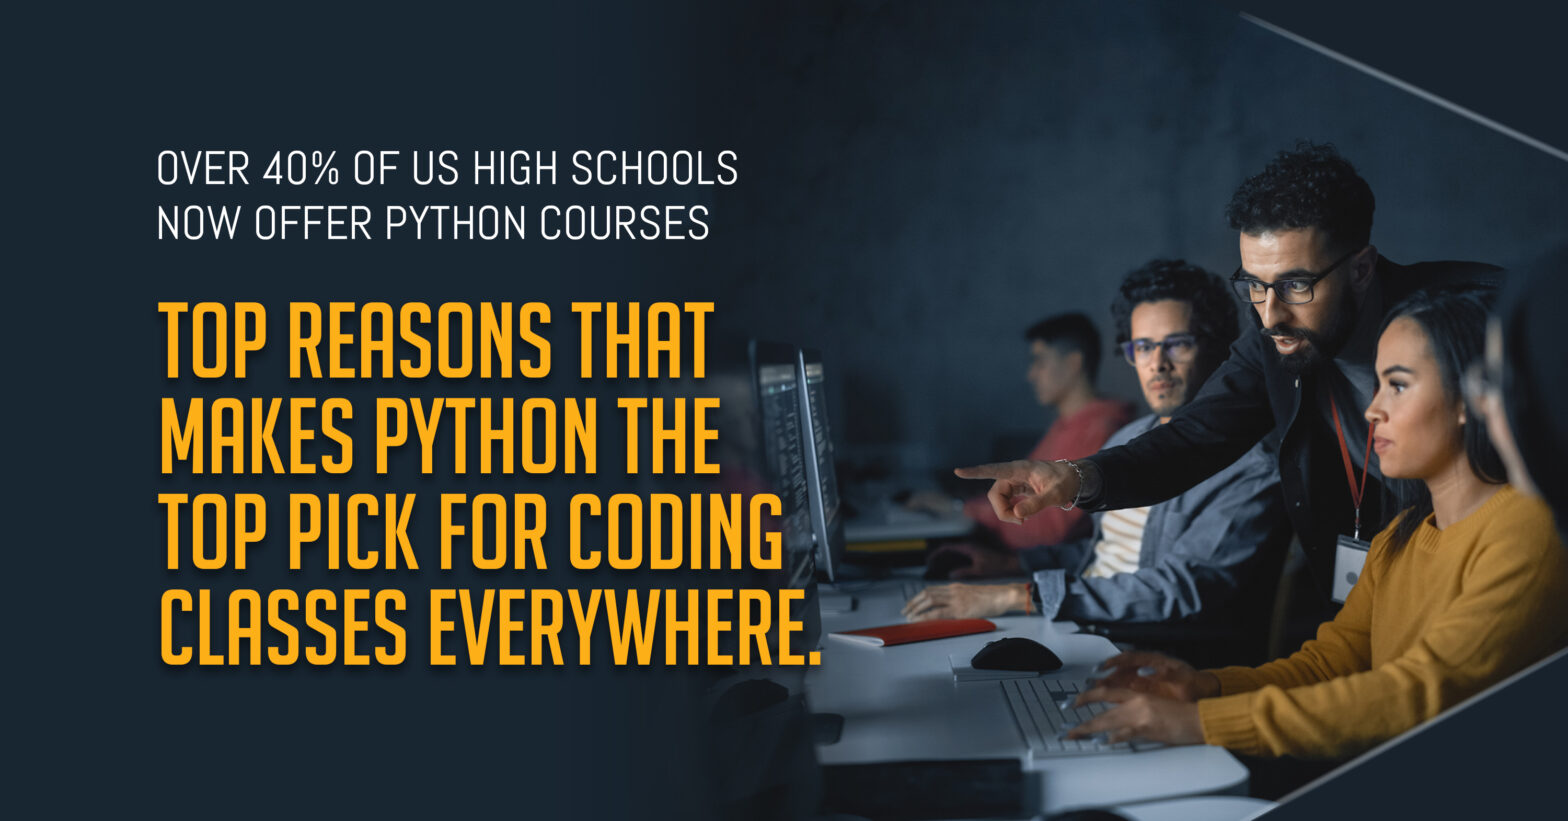 Over 40% of US high schools now offer Python courses - Why? Reasons Explained